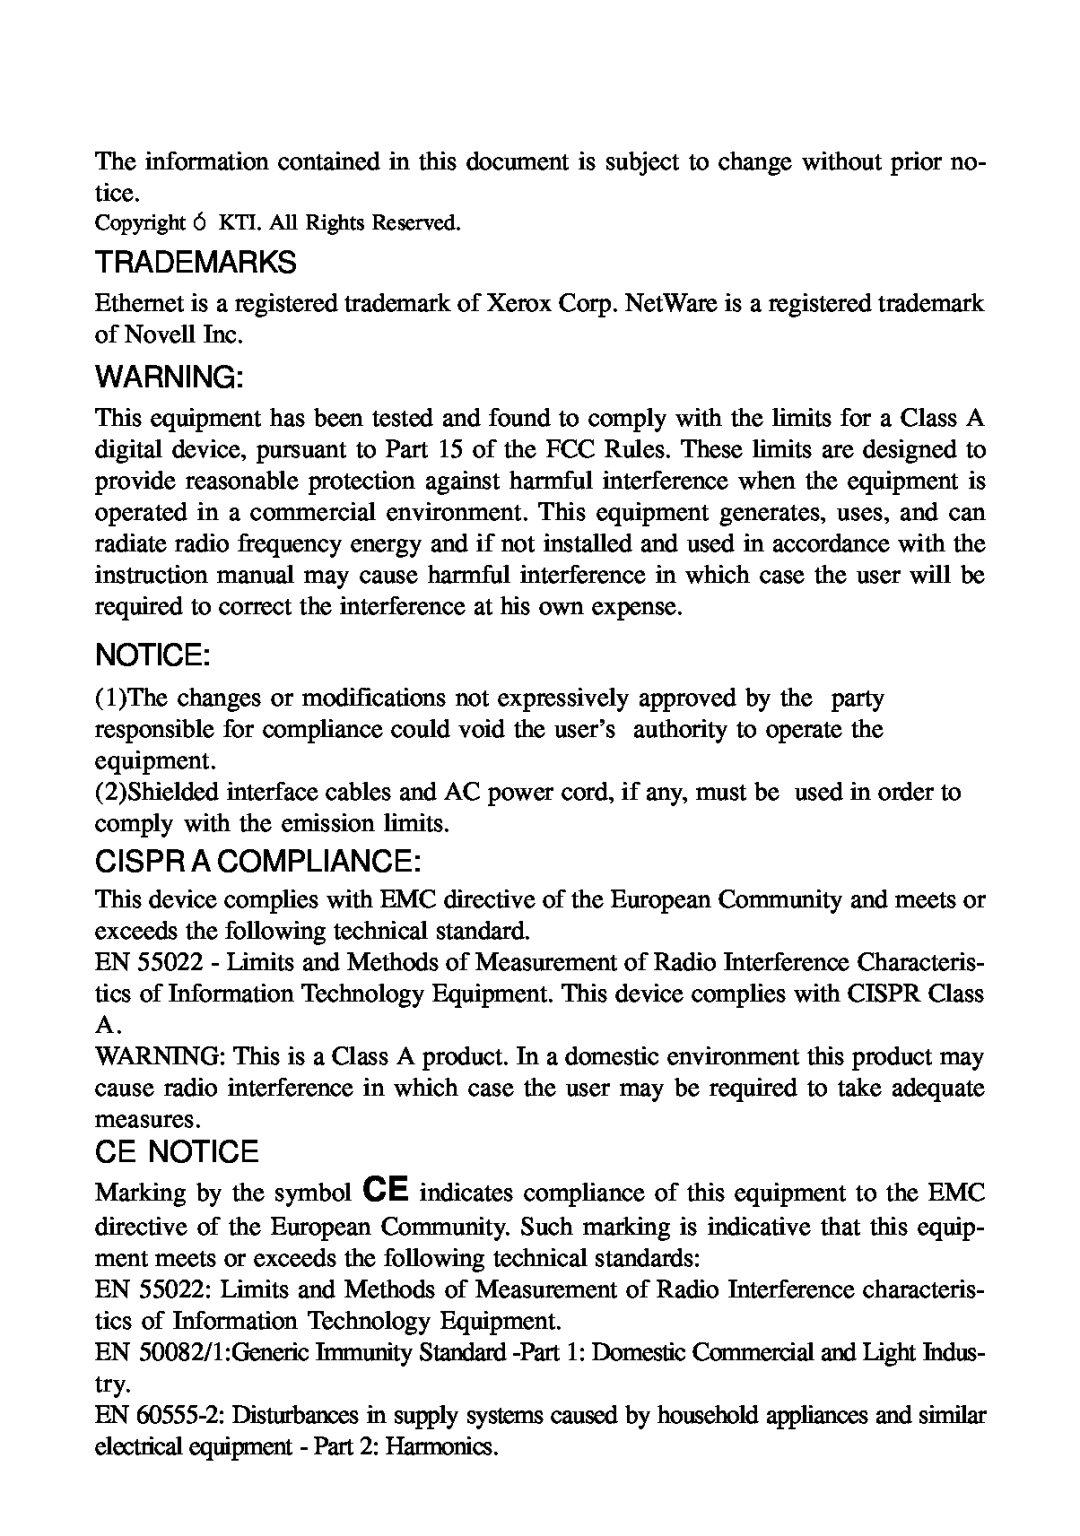 KTI Networks DH-8T manual Trademarks, Cispr A Compliance, Ce Notice 